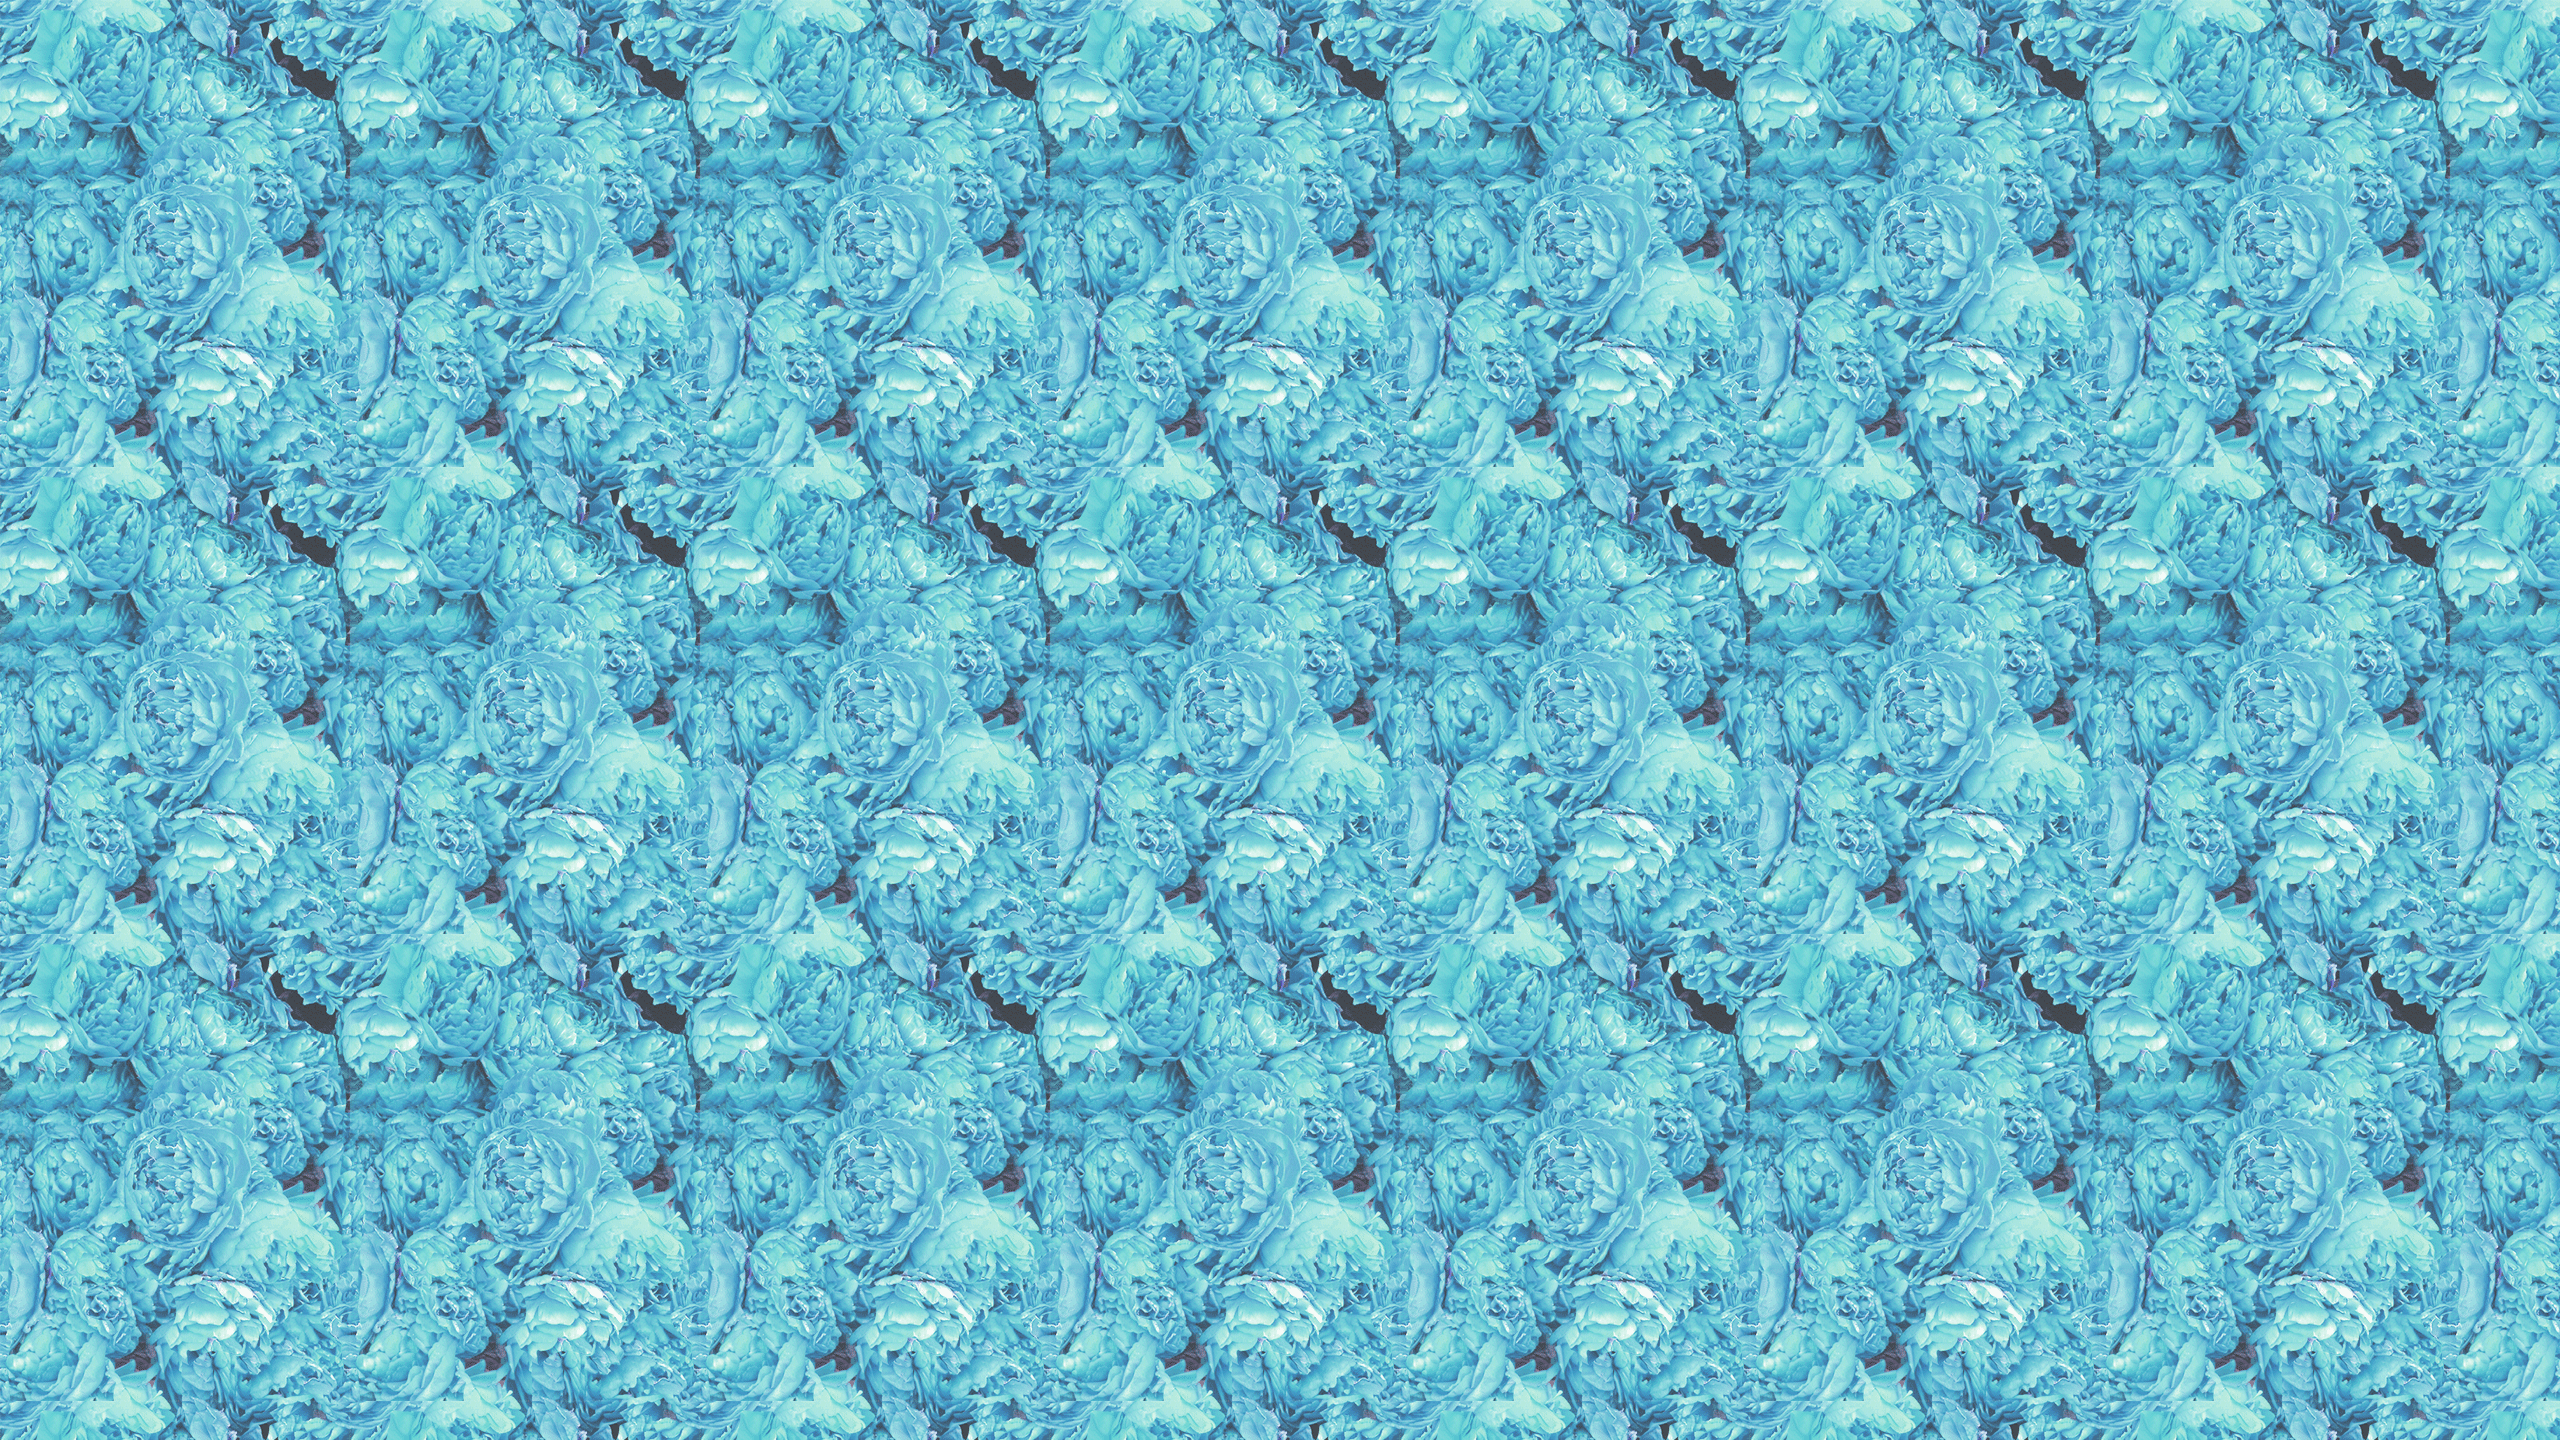 this Blue Hydrangea Desktop Wallpaper is easy Just save the wallpaper 2560x1440